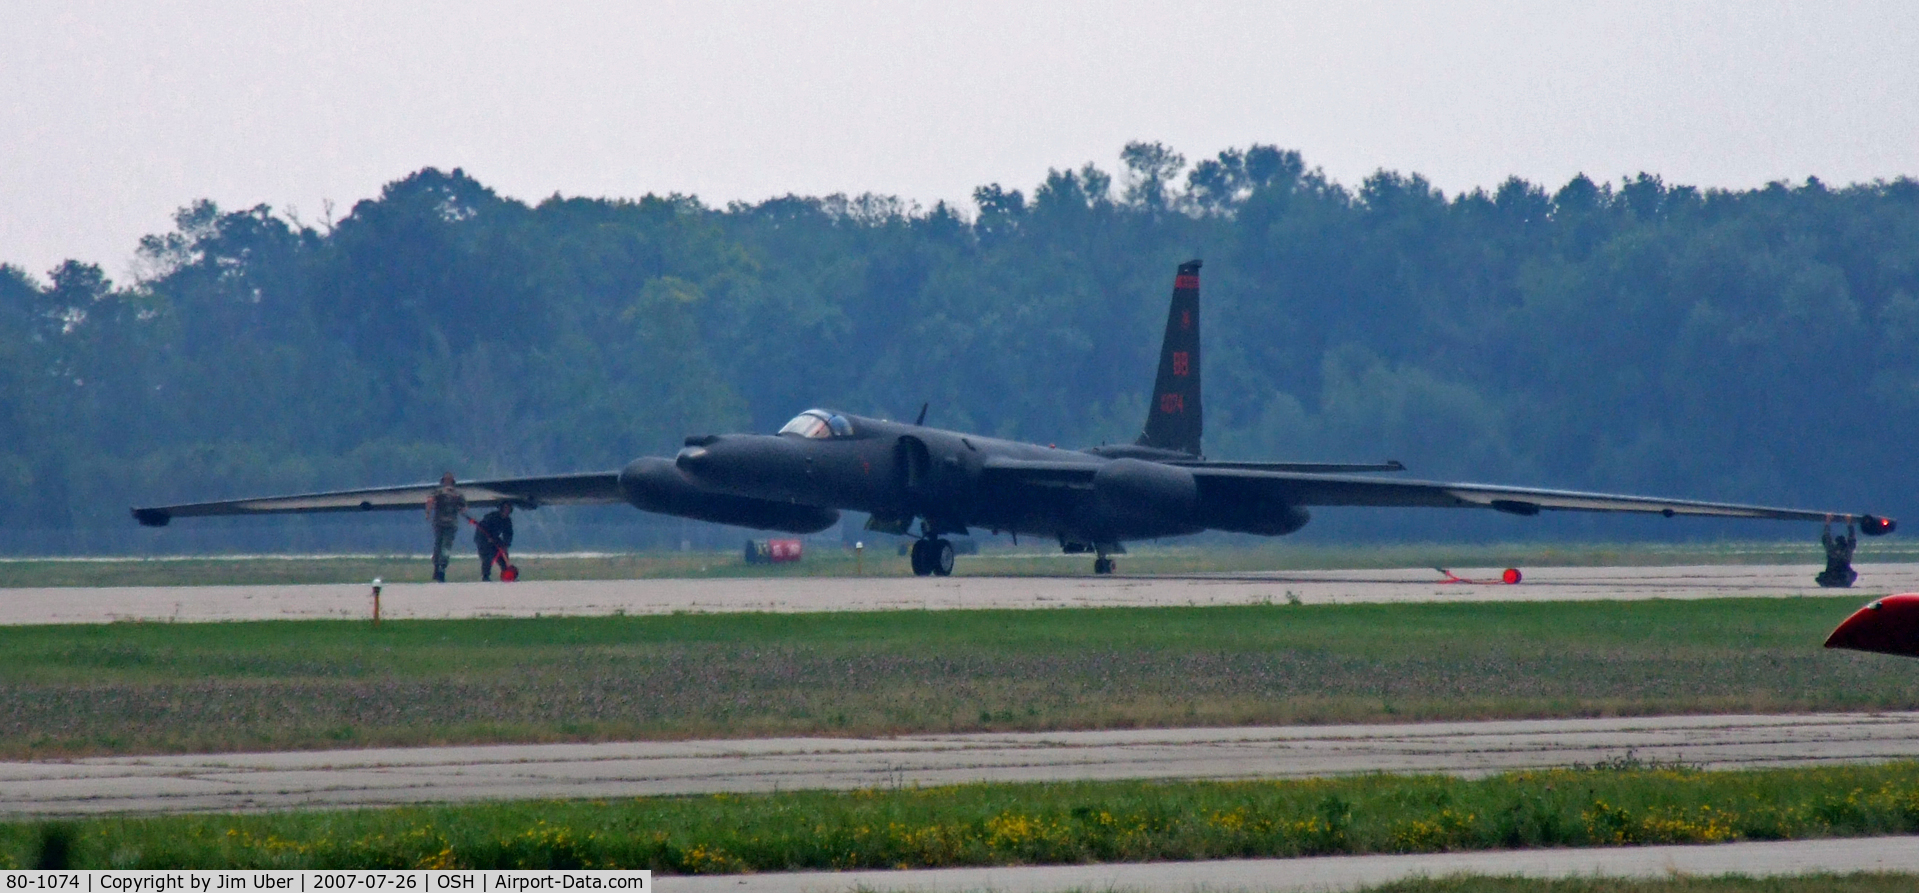 80-1074, 1980 Lockheed U-2S C/N 12-074, I can remember when this photo would get me shot